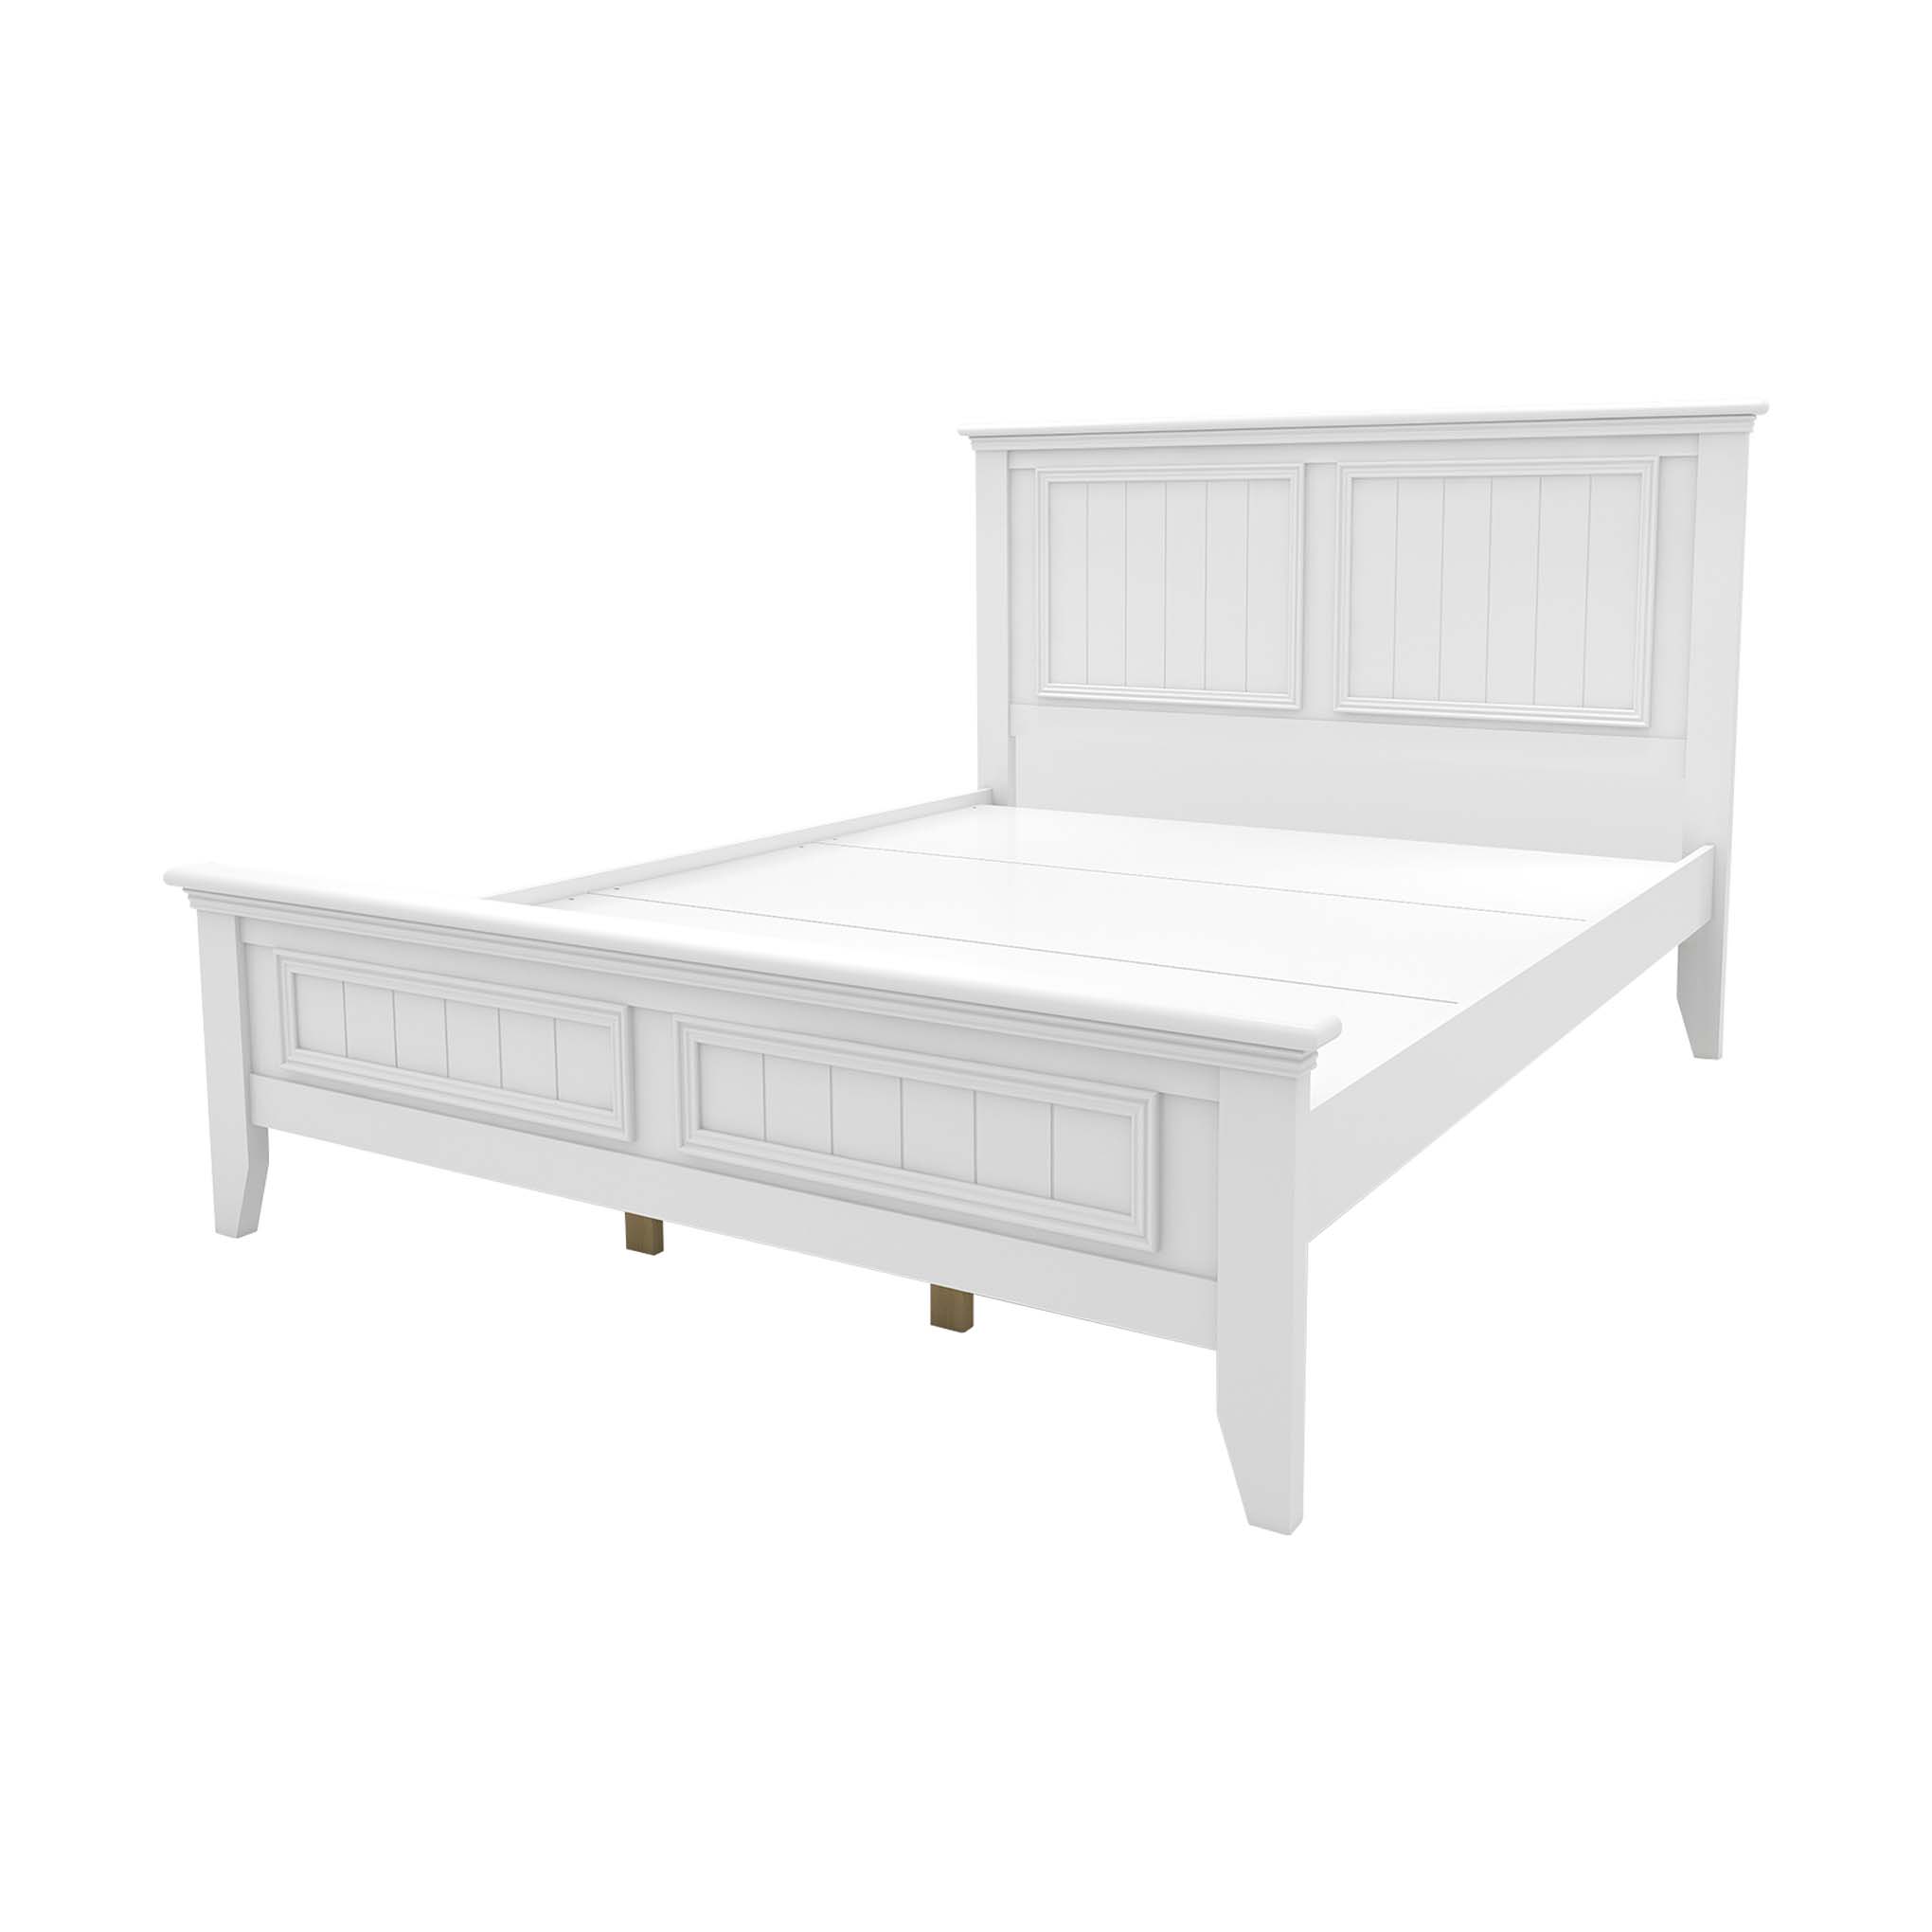 <b>Bolivar King/Queen Bed</b><br>King : L2016 X W1990 X H1200 MM<br>Queen : L2016 X W1685 X H1200 MM